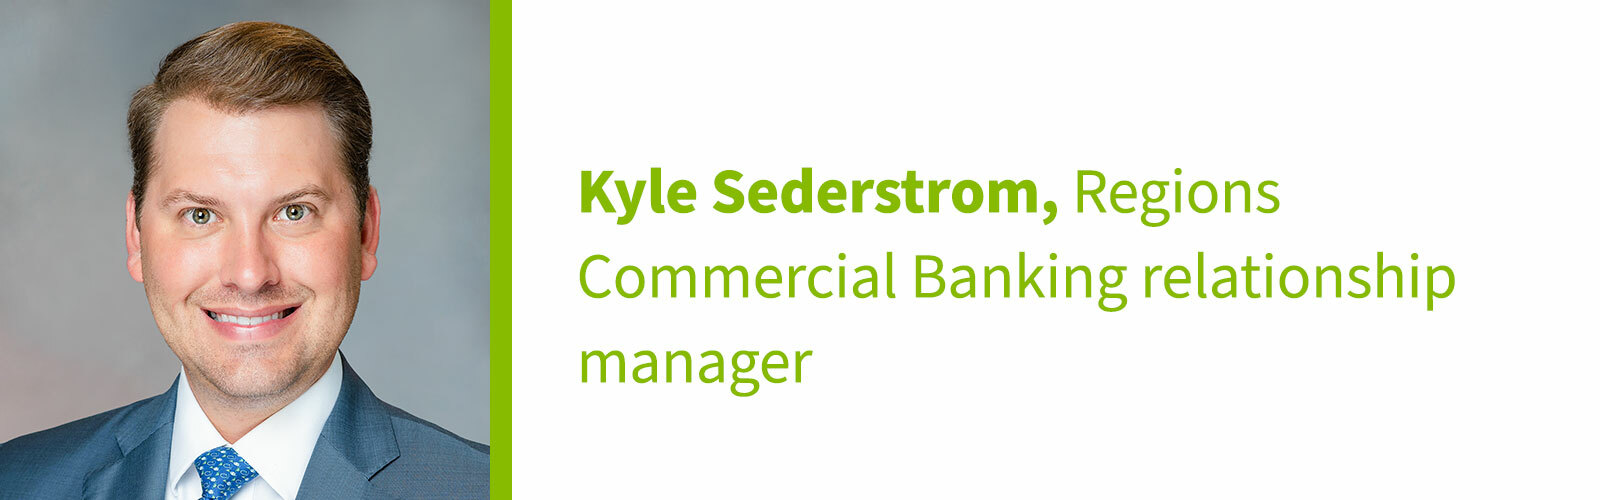 Kyle Sederstrom Headshot and Title